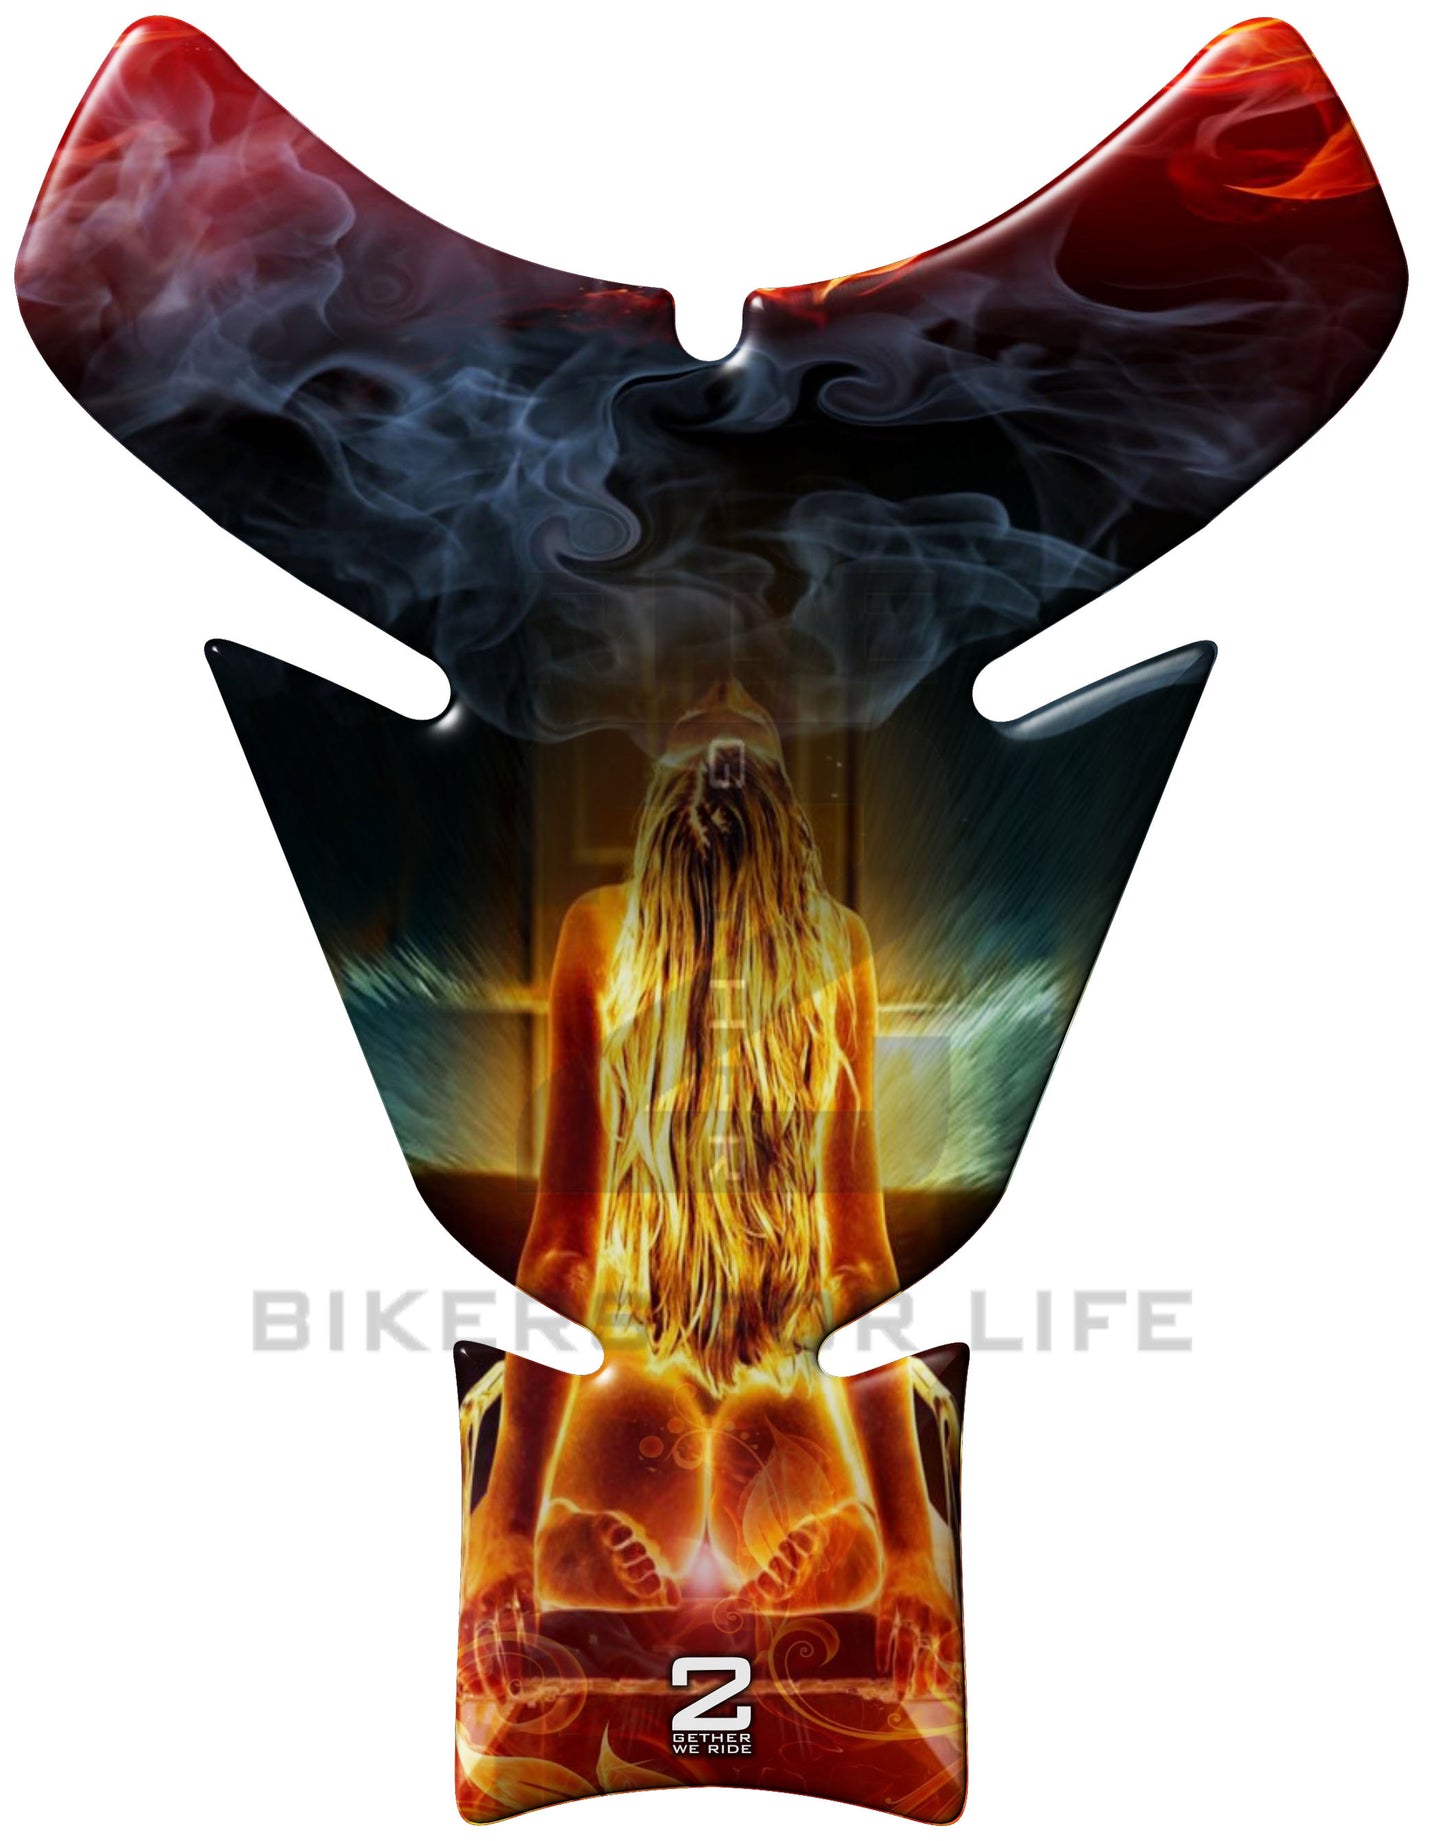 Universal Fit Fire and Ice Neon Flaming Lady Motor Bike Tank Pad Protector. A Street Pad which fits most motorcycles.